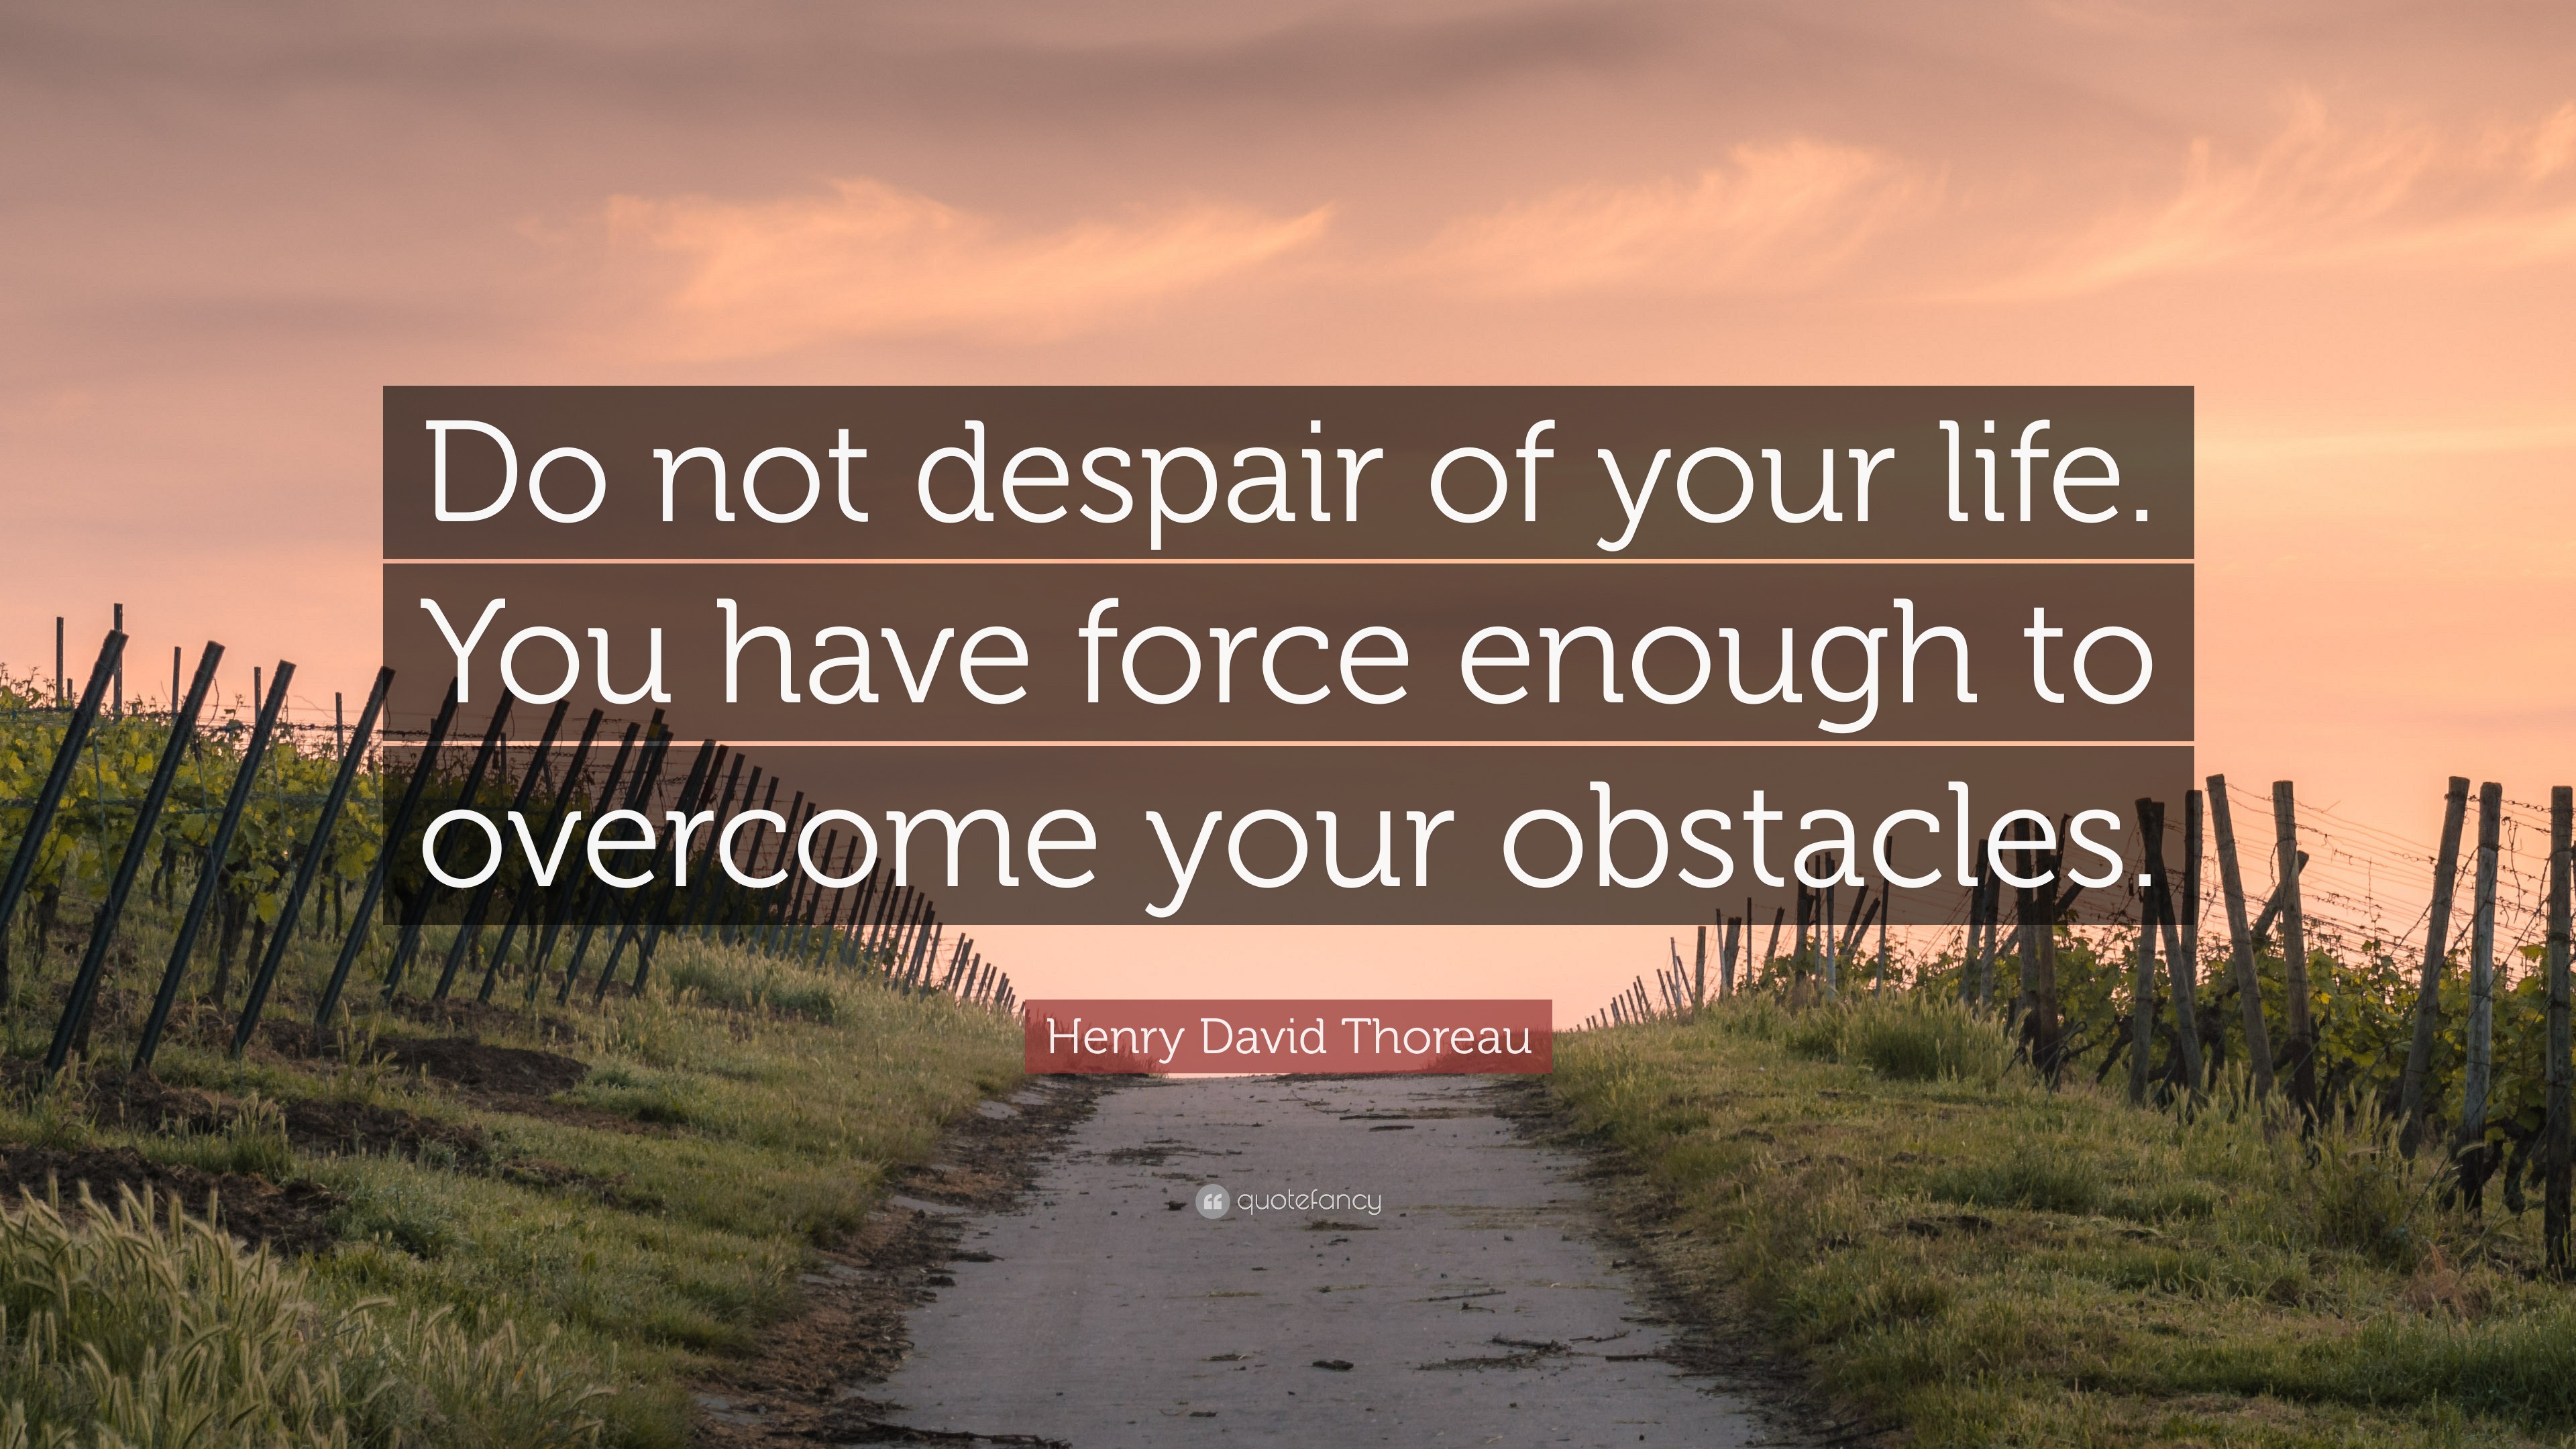 Henry David Thoreau Quote: “Do not despair of your life. You have force ...